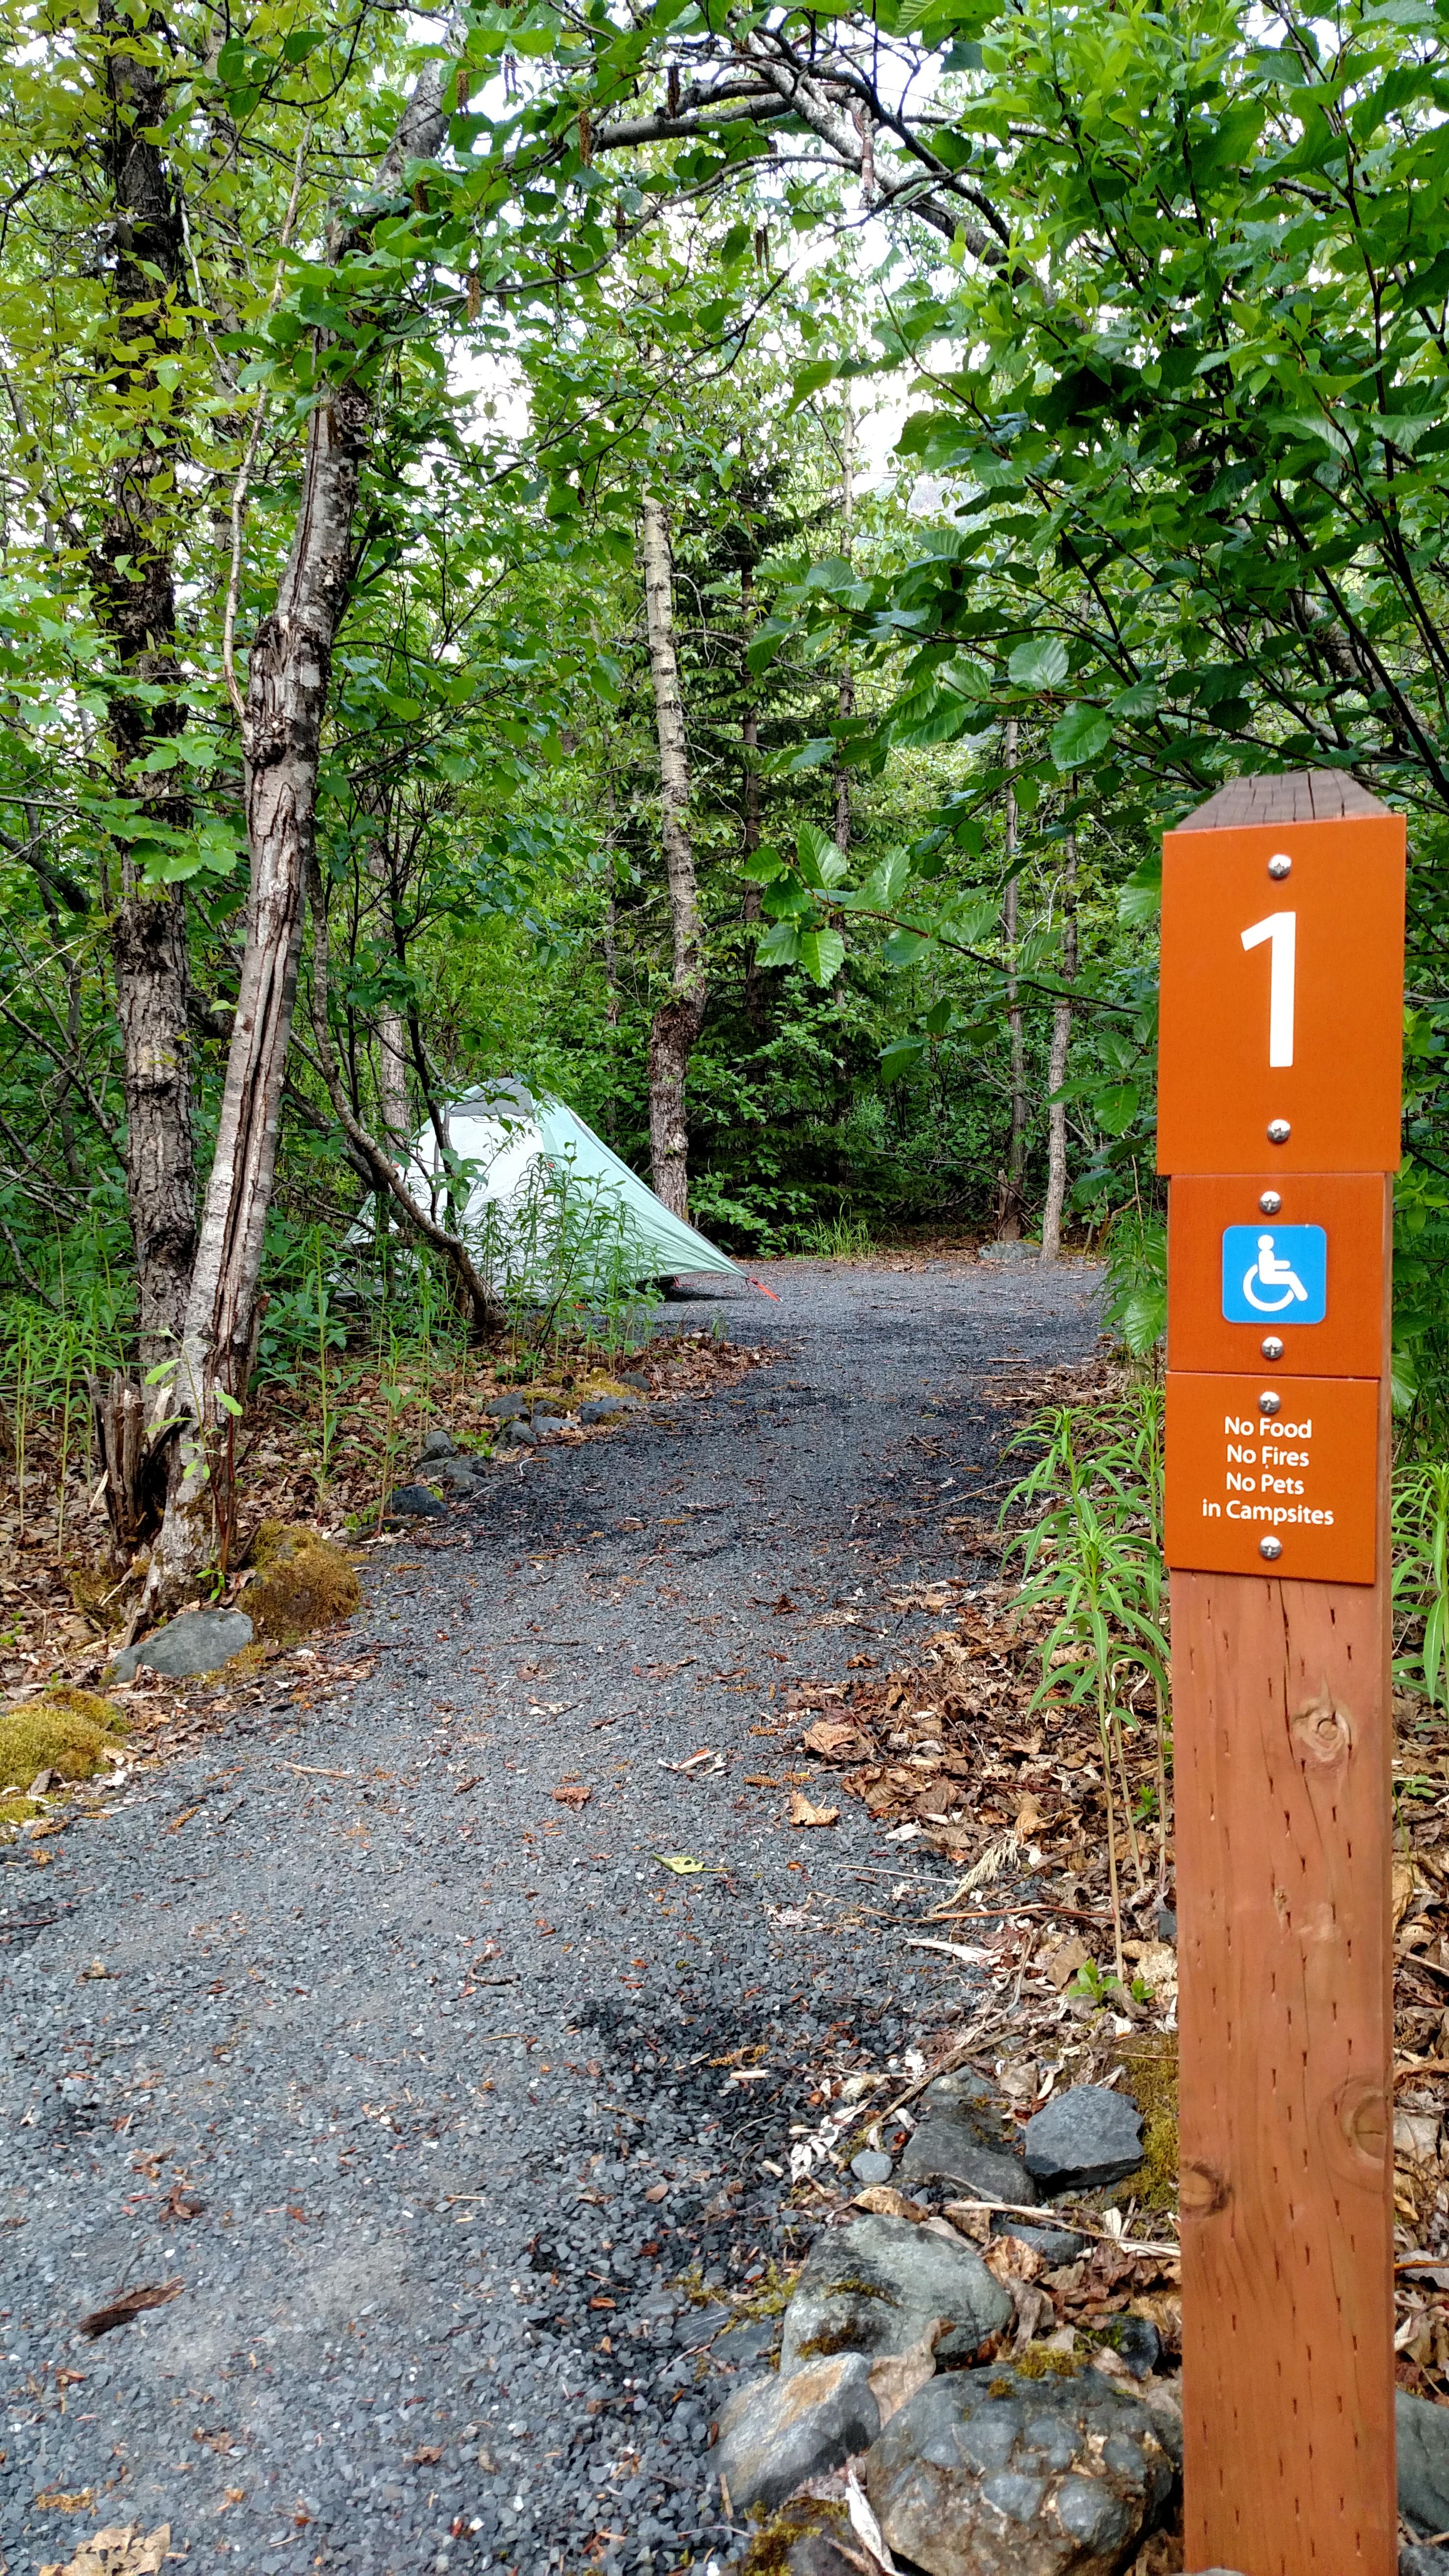 sign post showing path to site #1, ADA accessible, and No food, fires or pets.